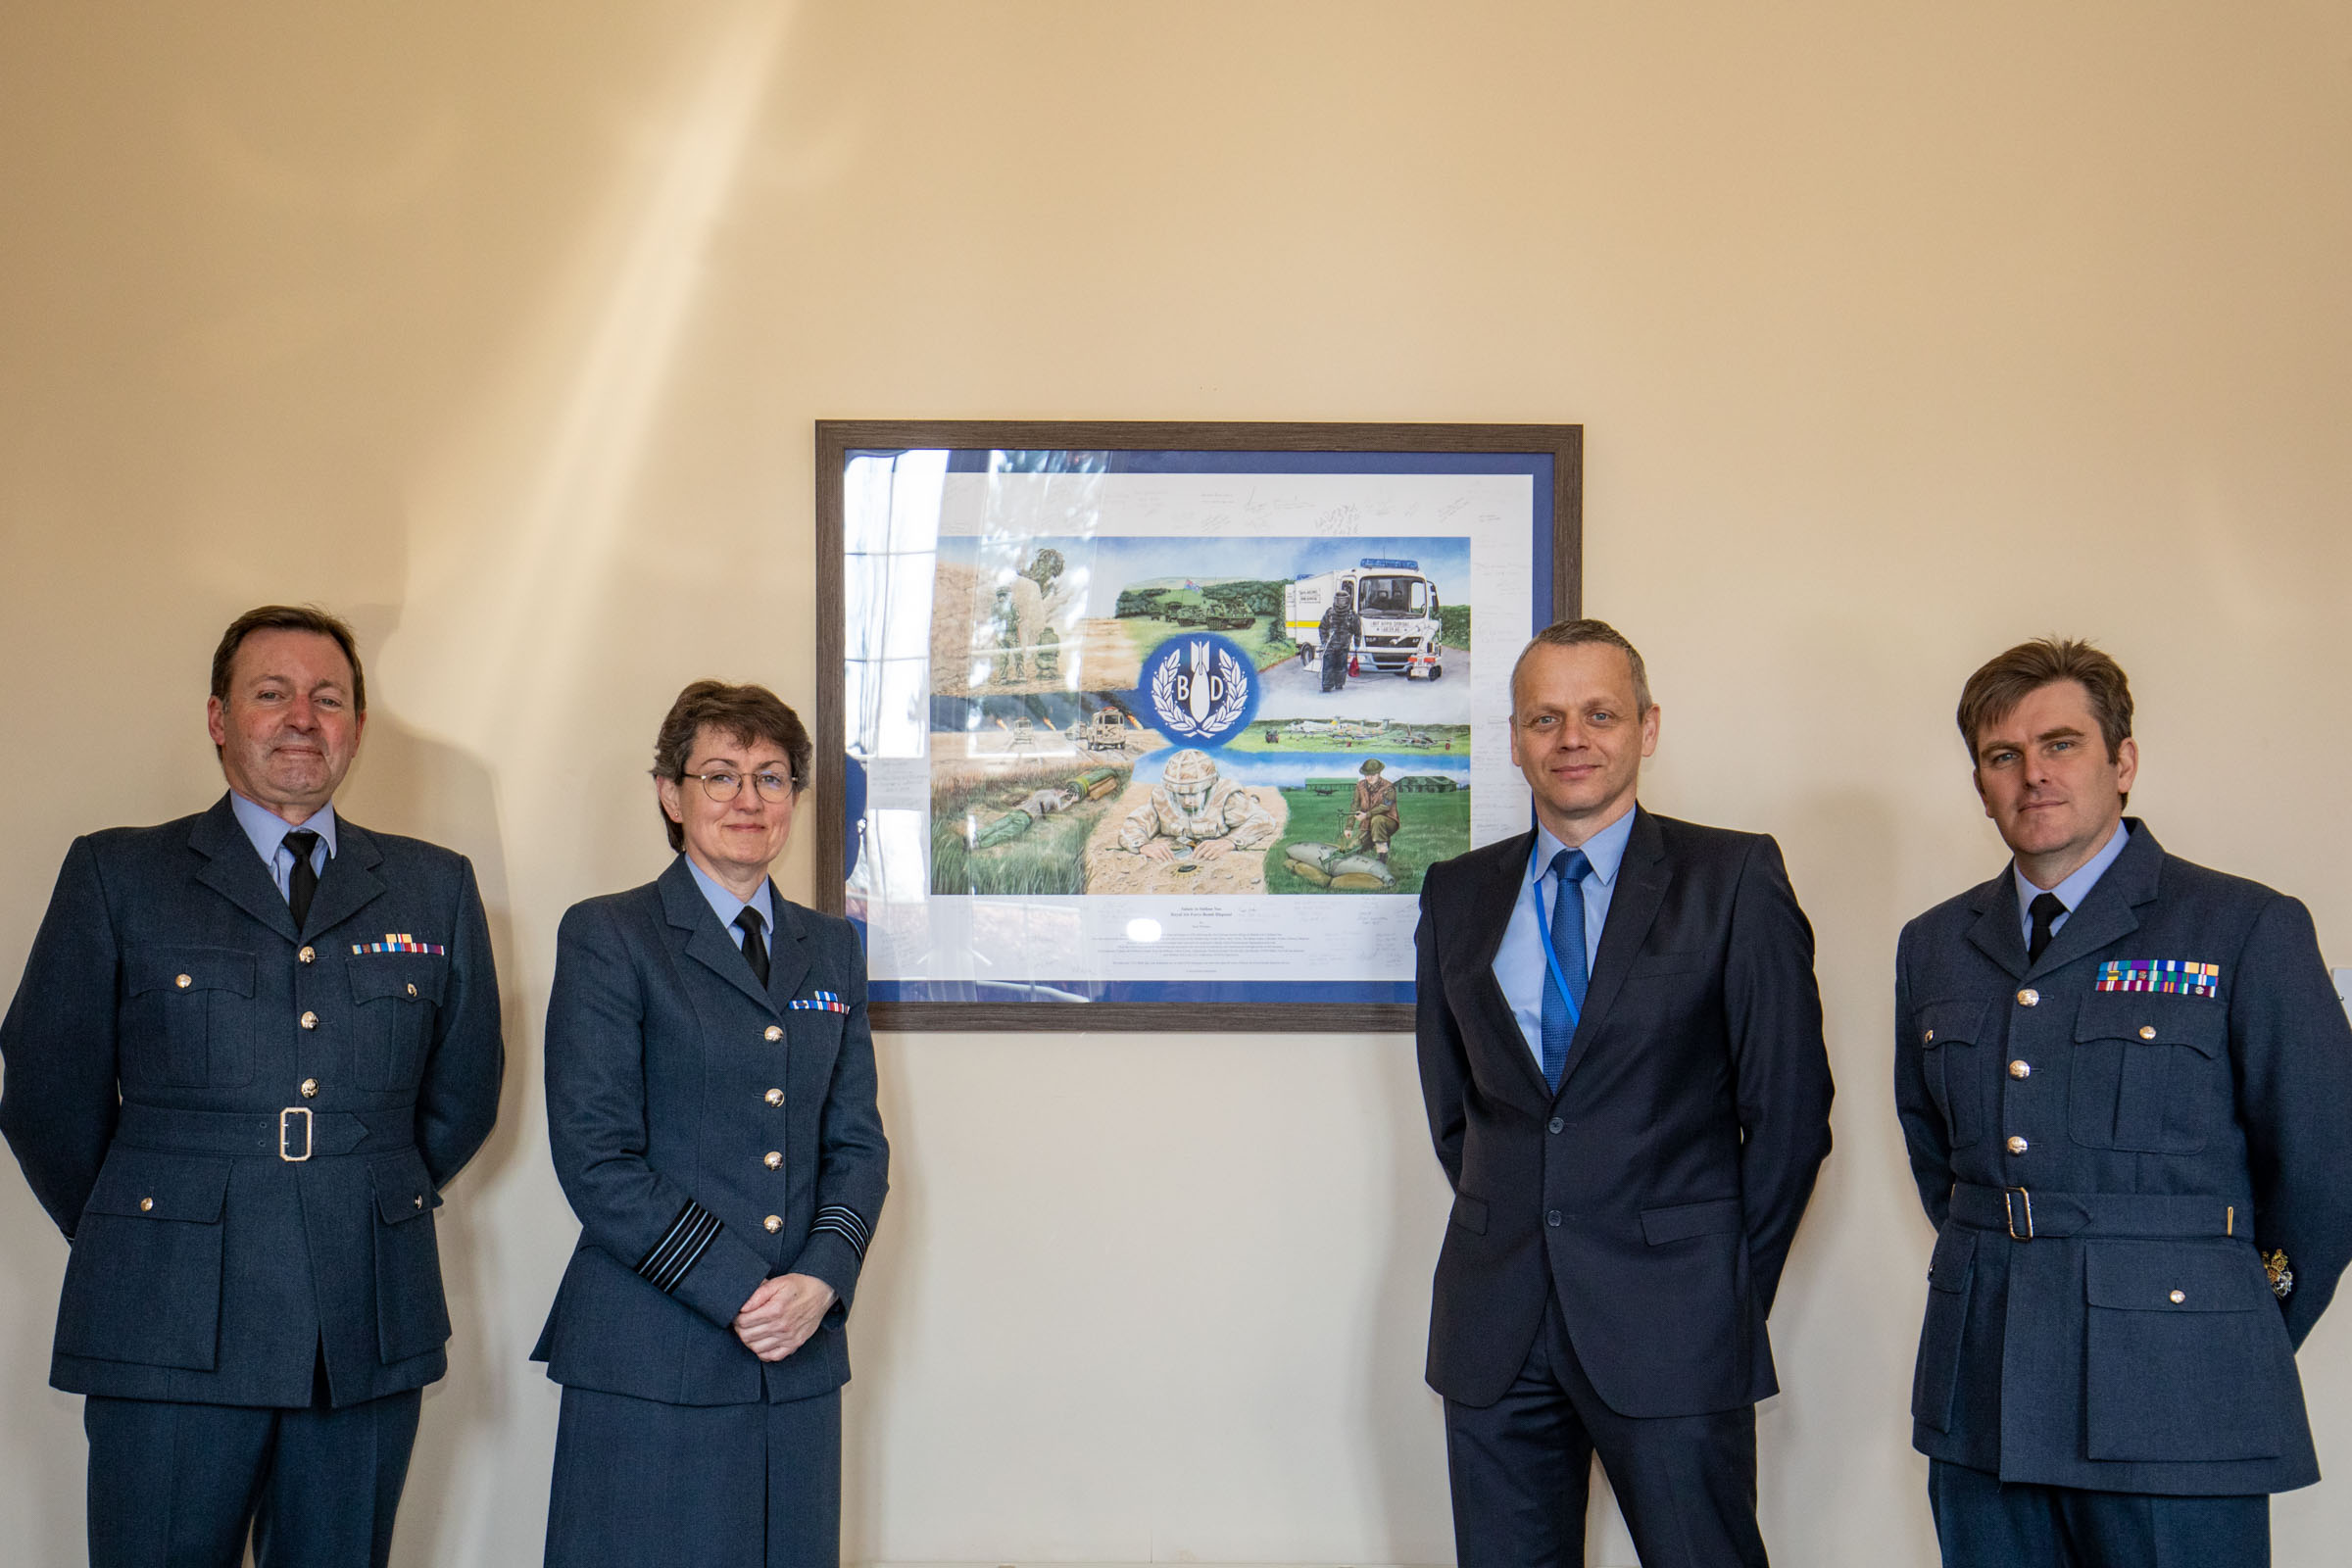 From left to right: Squadron Leader Al Auchterlonie, Wing Commander Maggie Boyle, Mr Mark Whitaker, Warrant Officer Dave Lowe